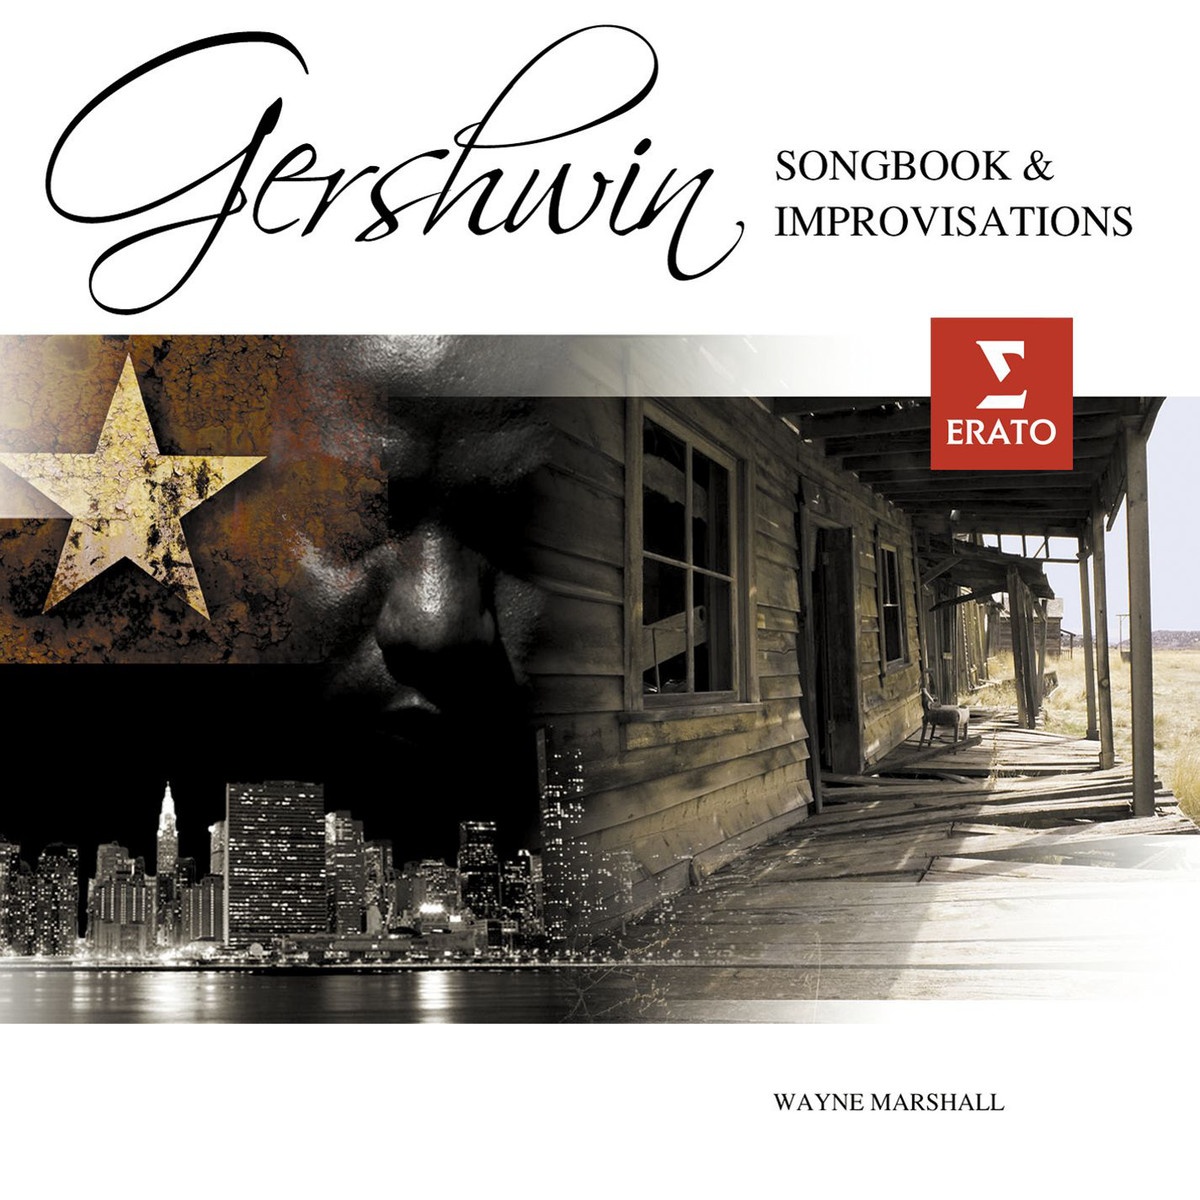 A Gershwin Songbook: improvisations on songs by George Gershwin: Fascinating rhythm (Lady, be Good)